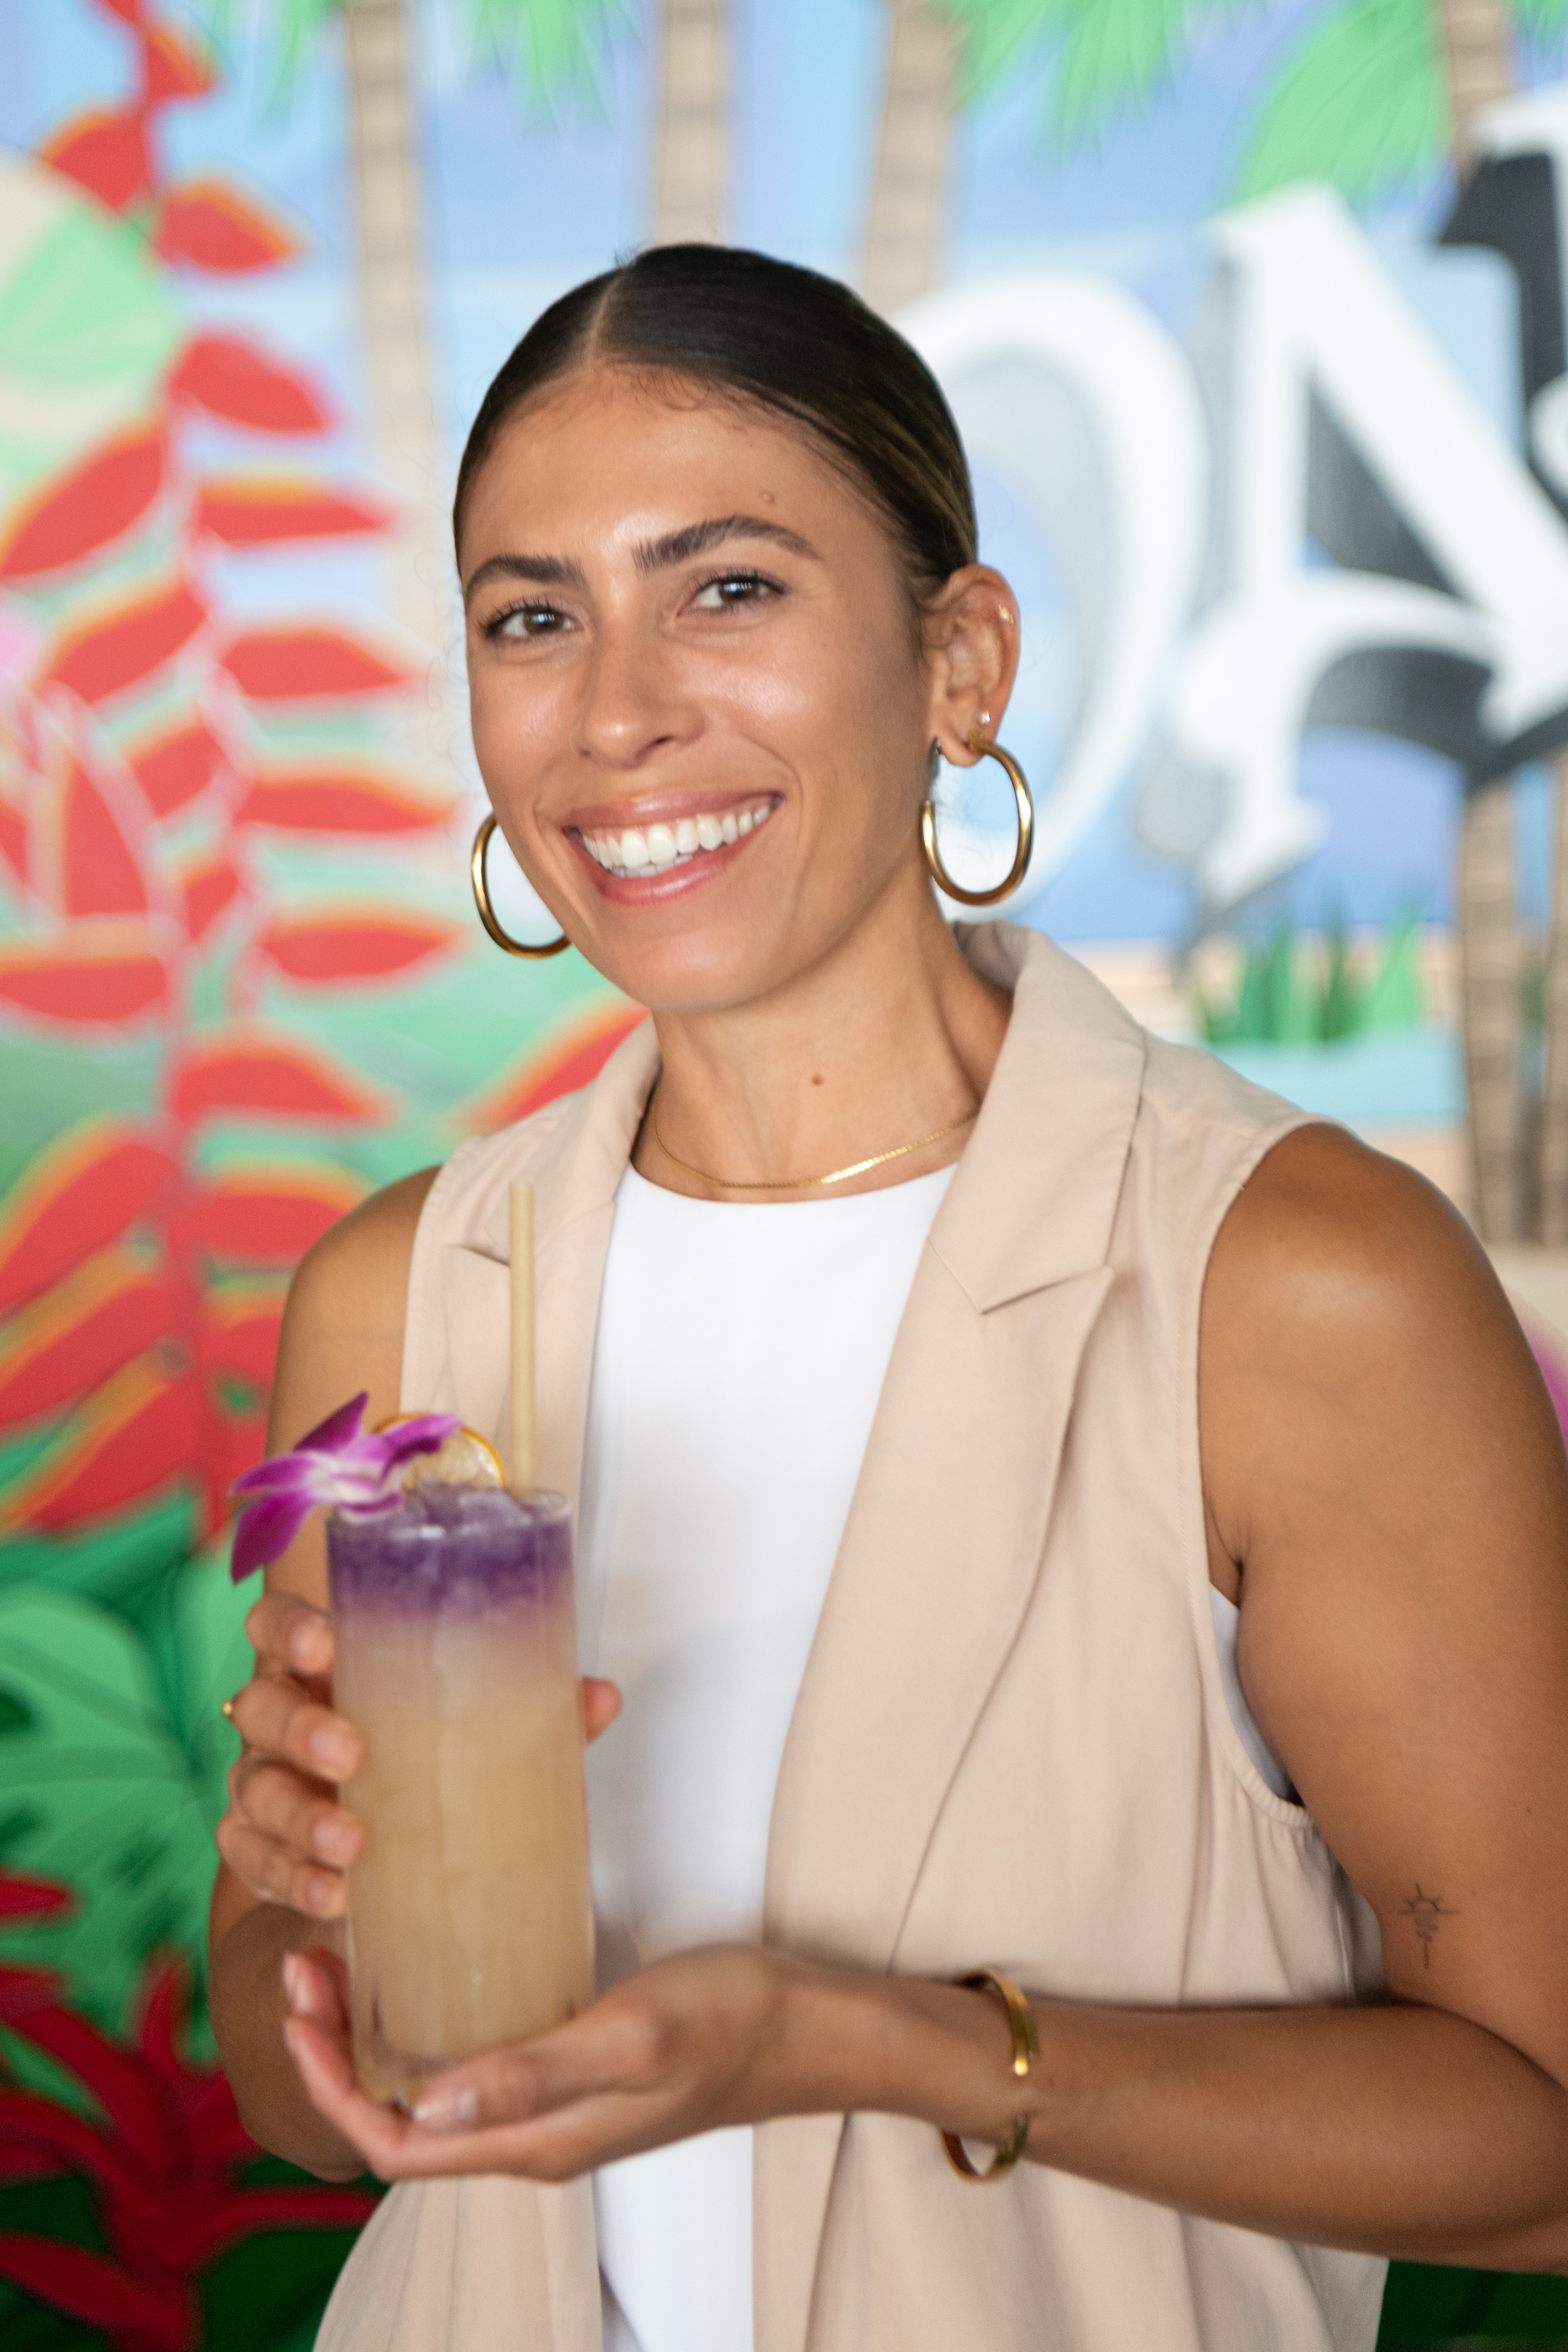 Woman smiles for a photo holding a cocktail